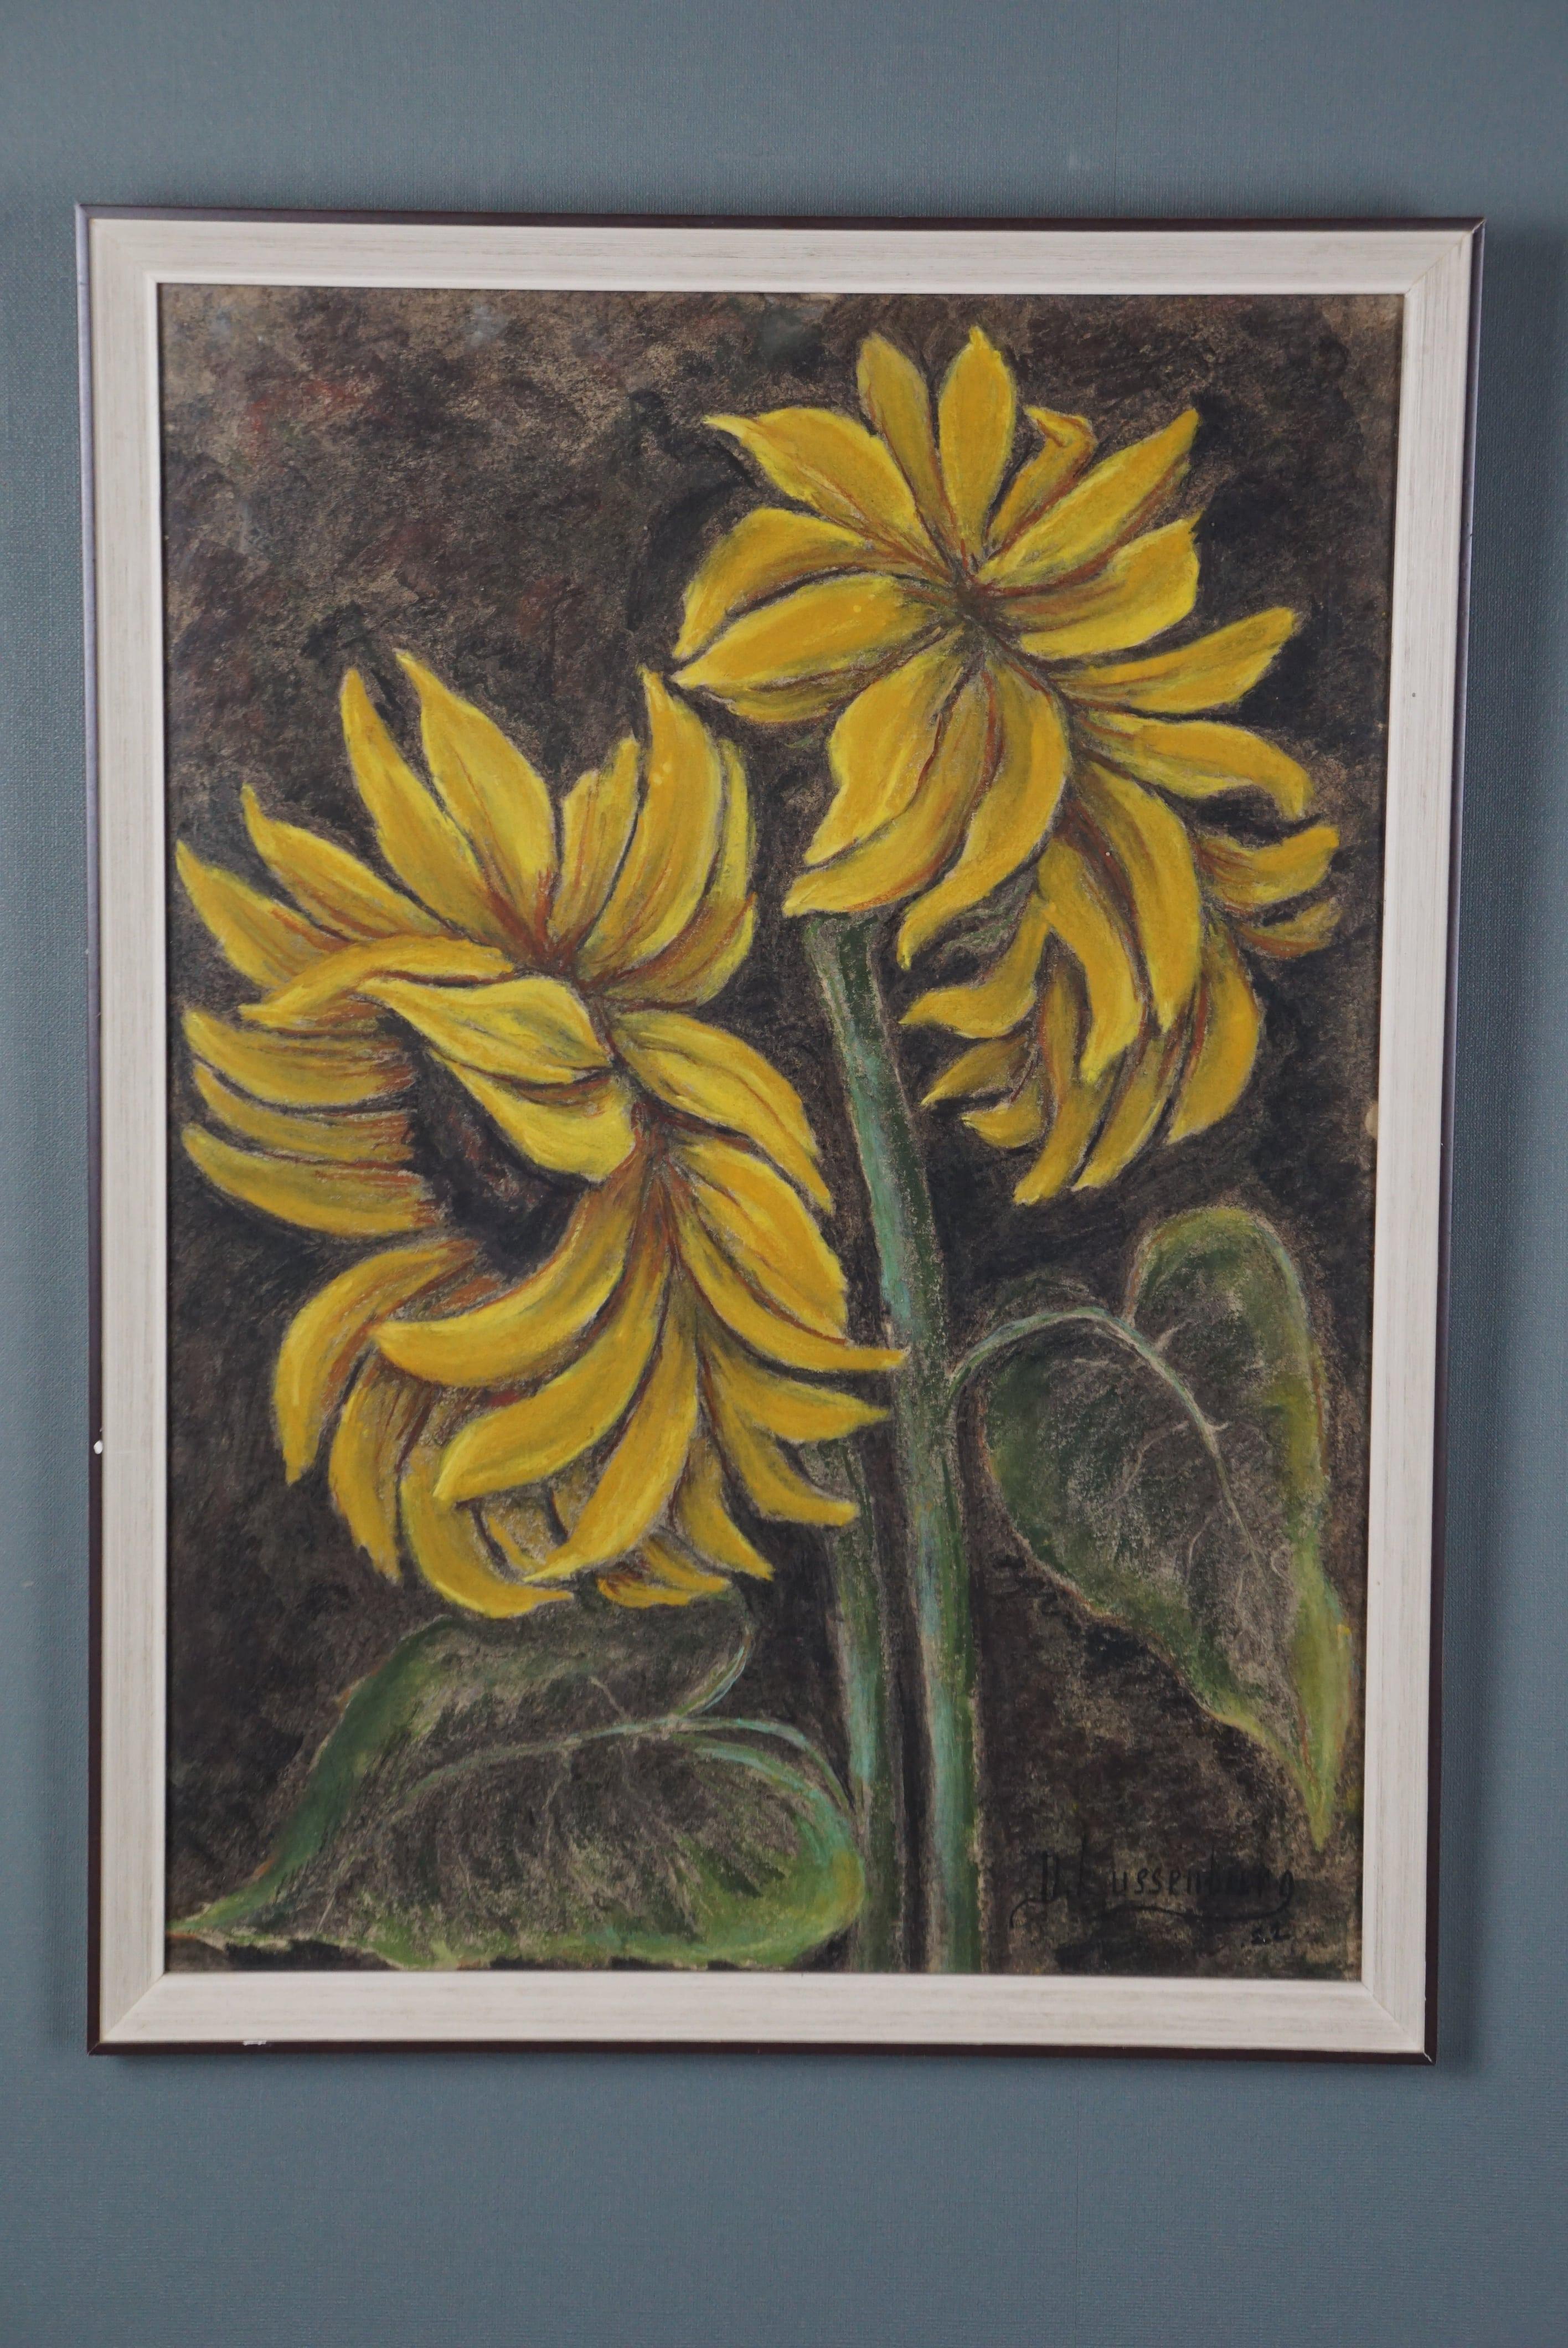 Offered this cheerful image of sunflowers.
With a visually appealing technique and clear lines, this is a chalk work of art that stands out. That is exactly why we purchased this warm, sunny image. The artwork is signed and in a matching